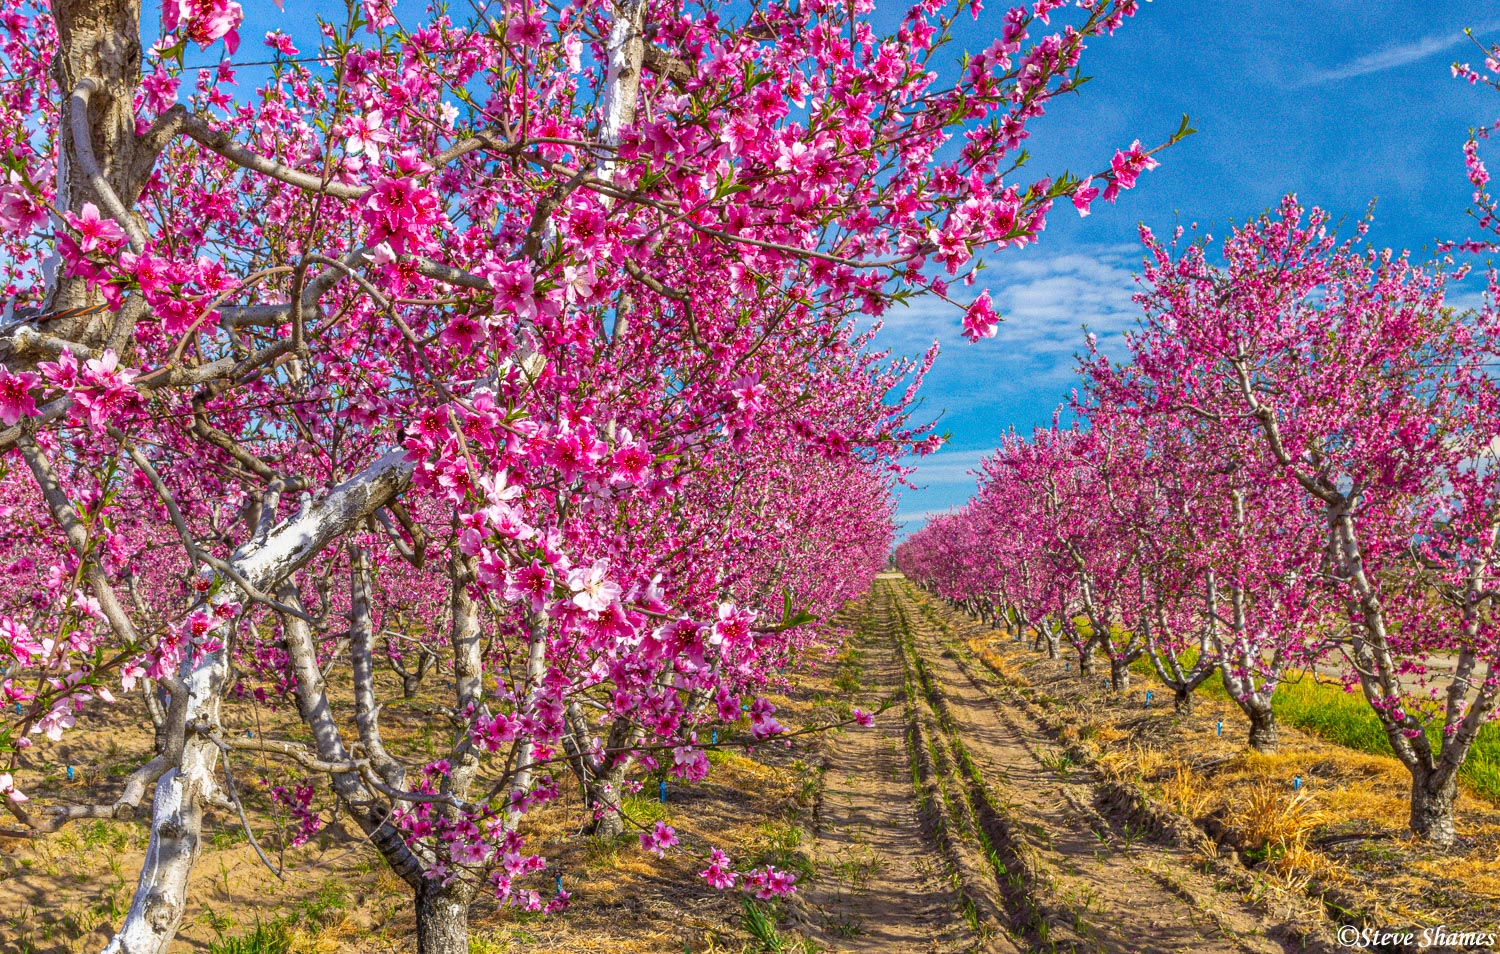 A Fresno County orchard in bloom. This time of the year is the most colorful around here.